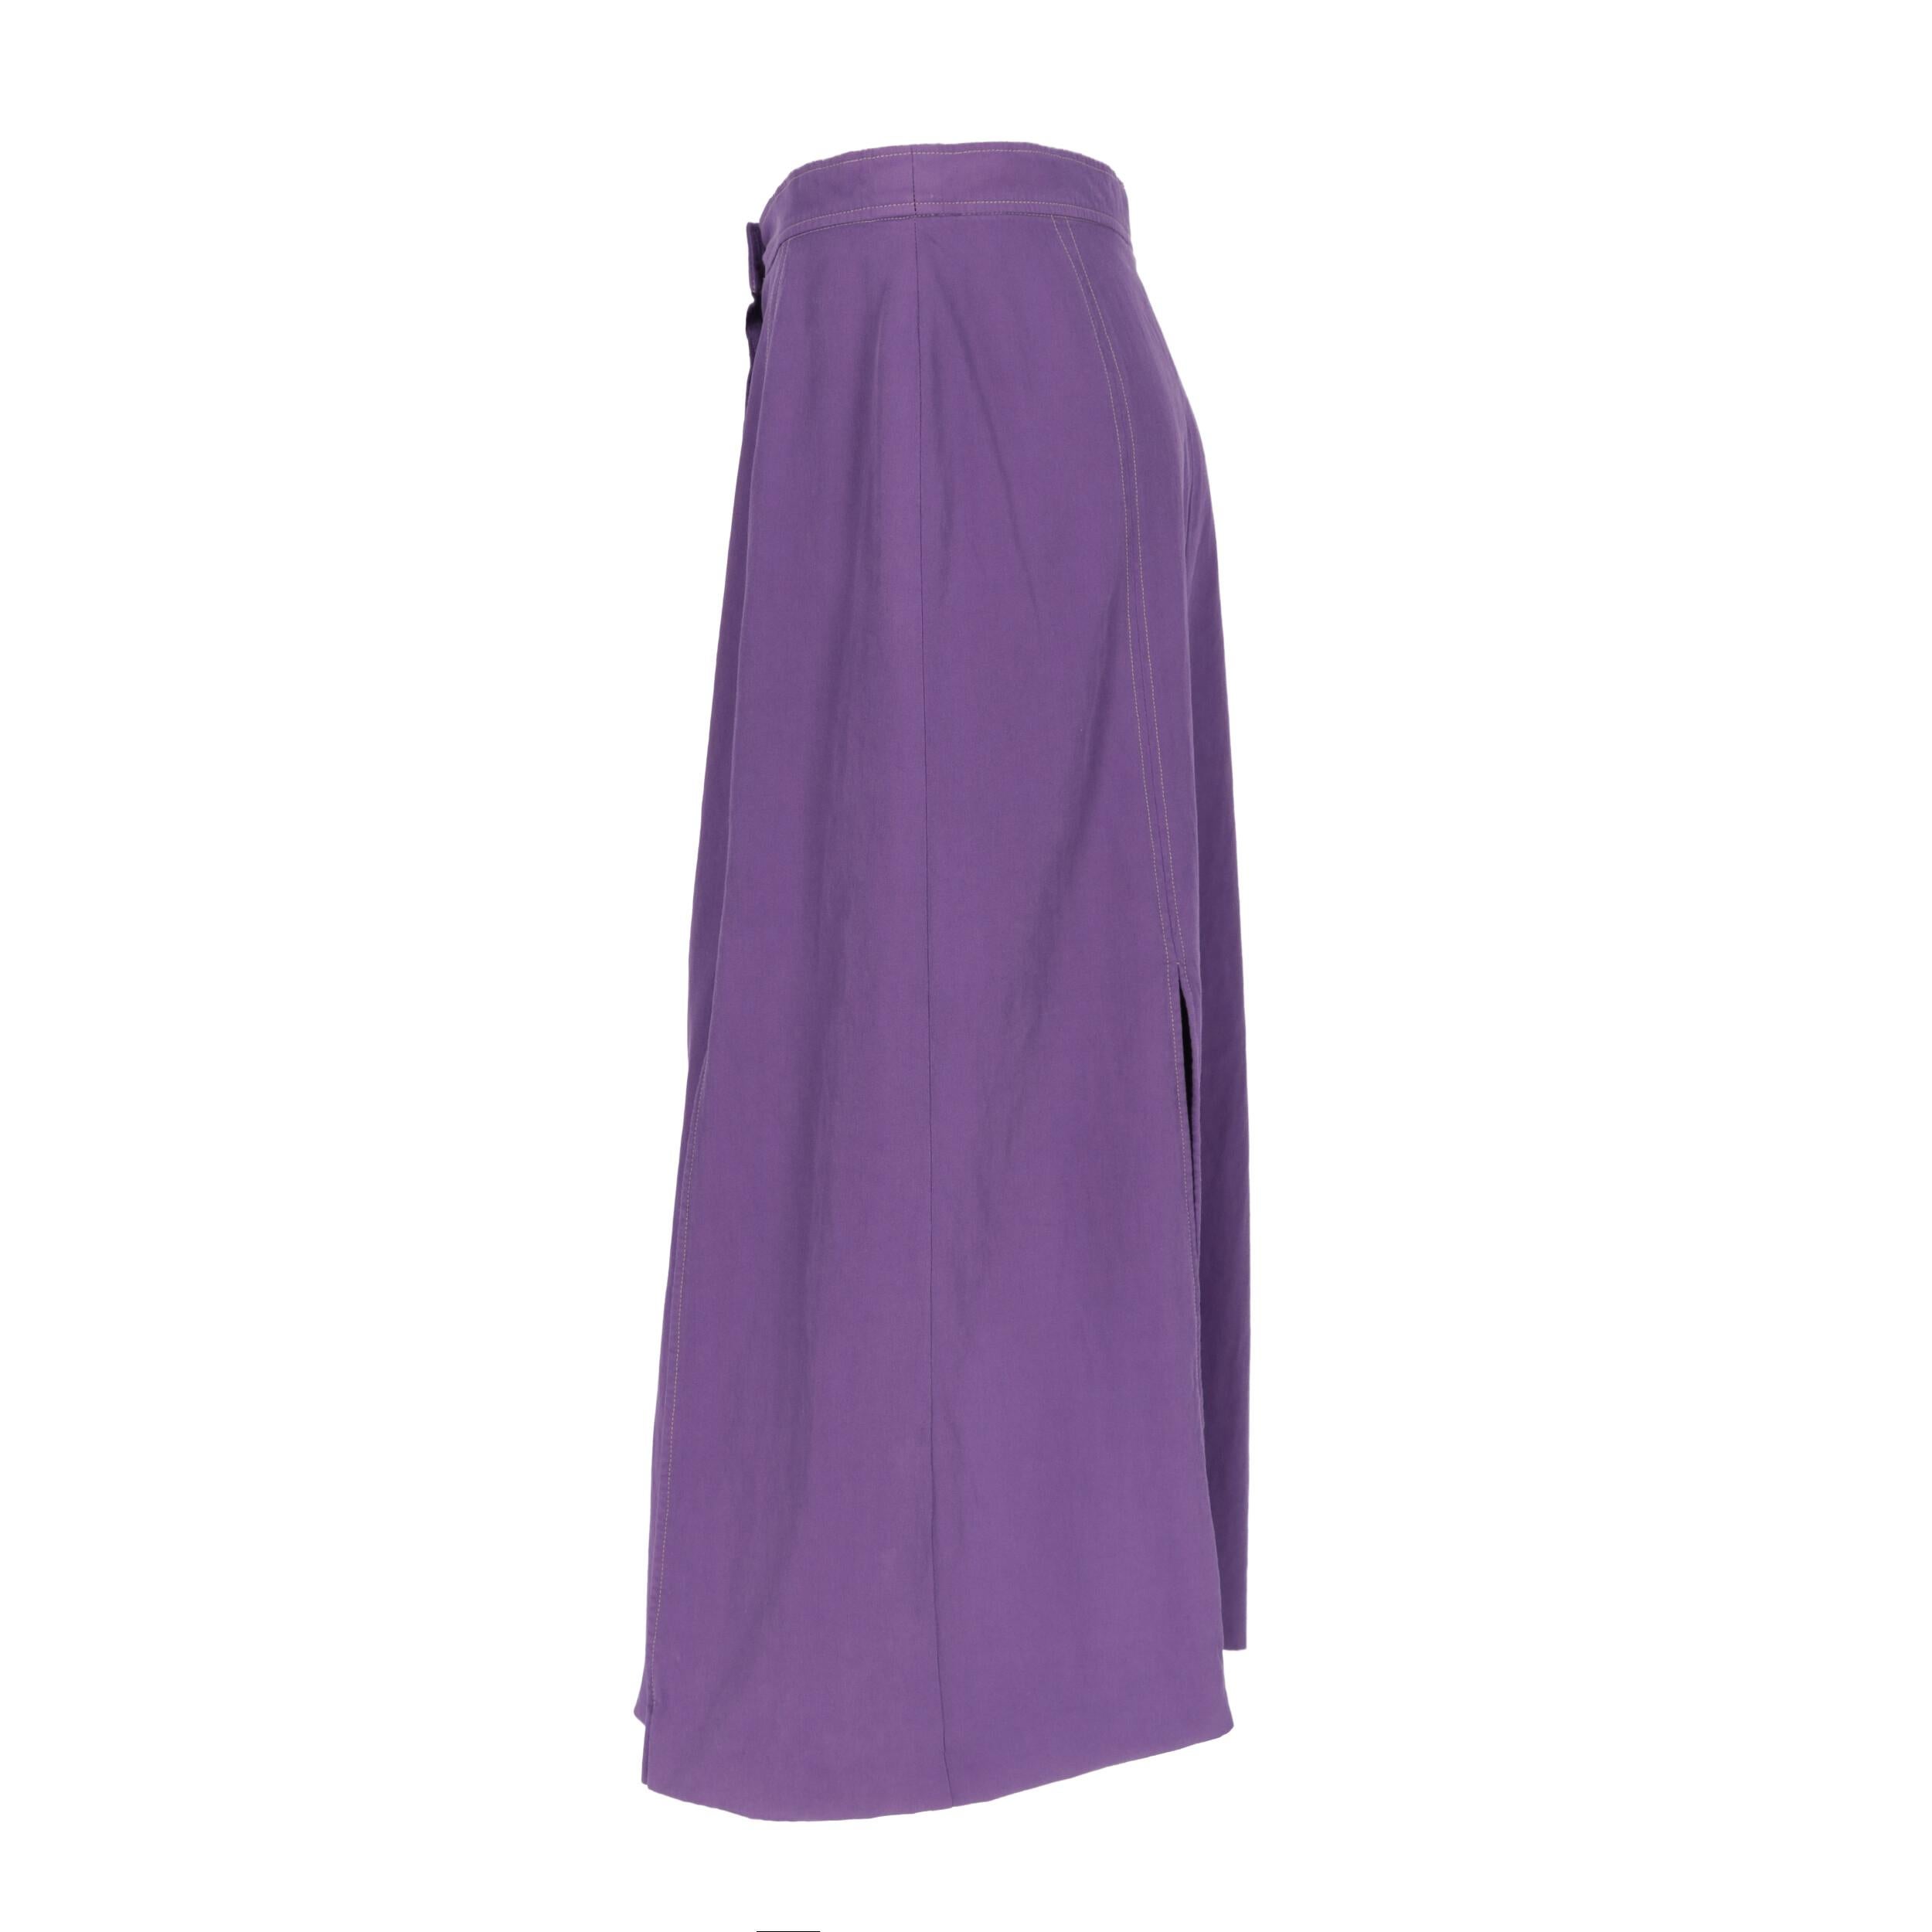 Louis Féraud purple viscose midi skirt. Front closure with buttons and decorative side slits.
Years: 90s

Made in Italy

Size: 44 IT

Flat measurements

Lenght: 84 cm
Waist: 36 cm 